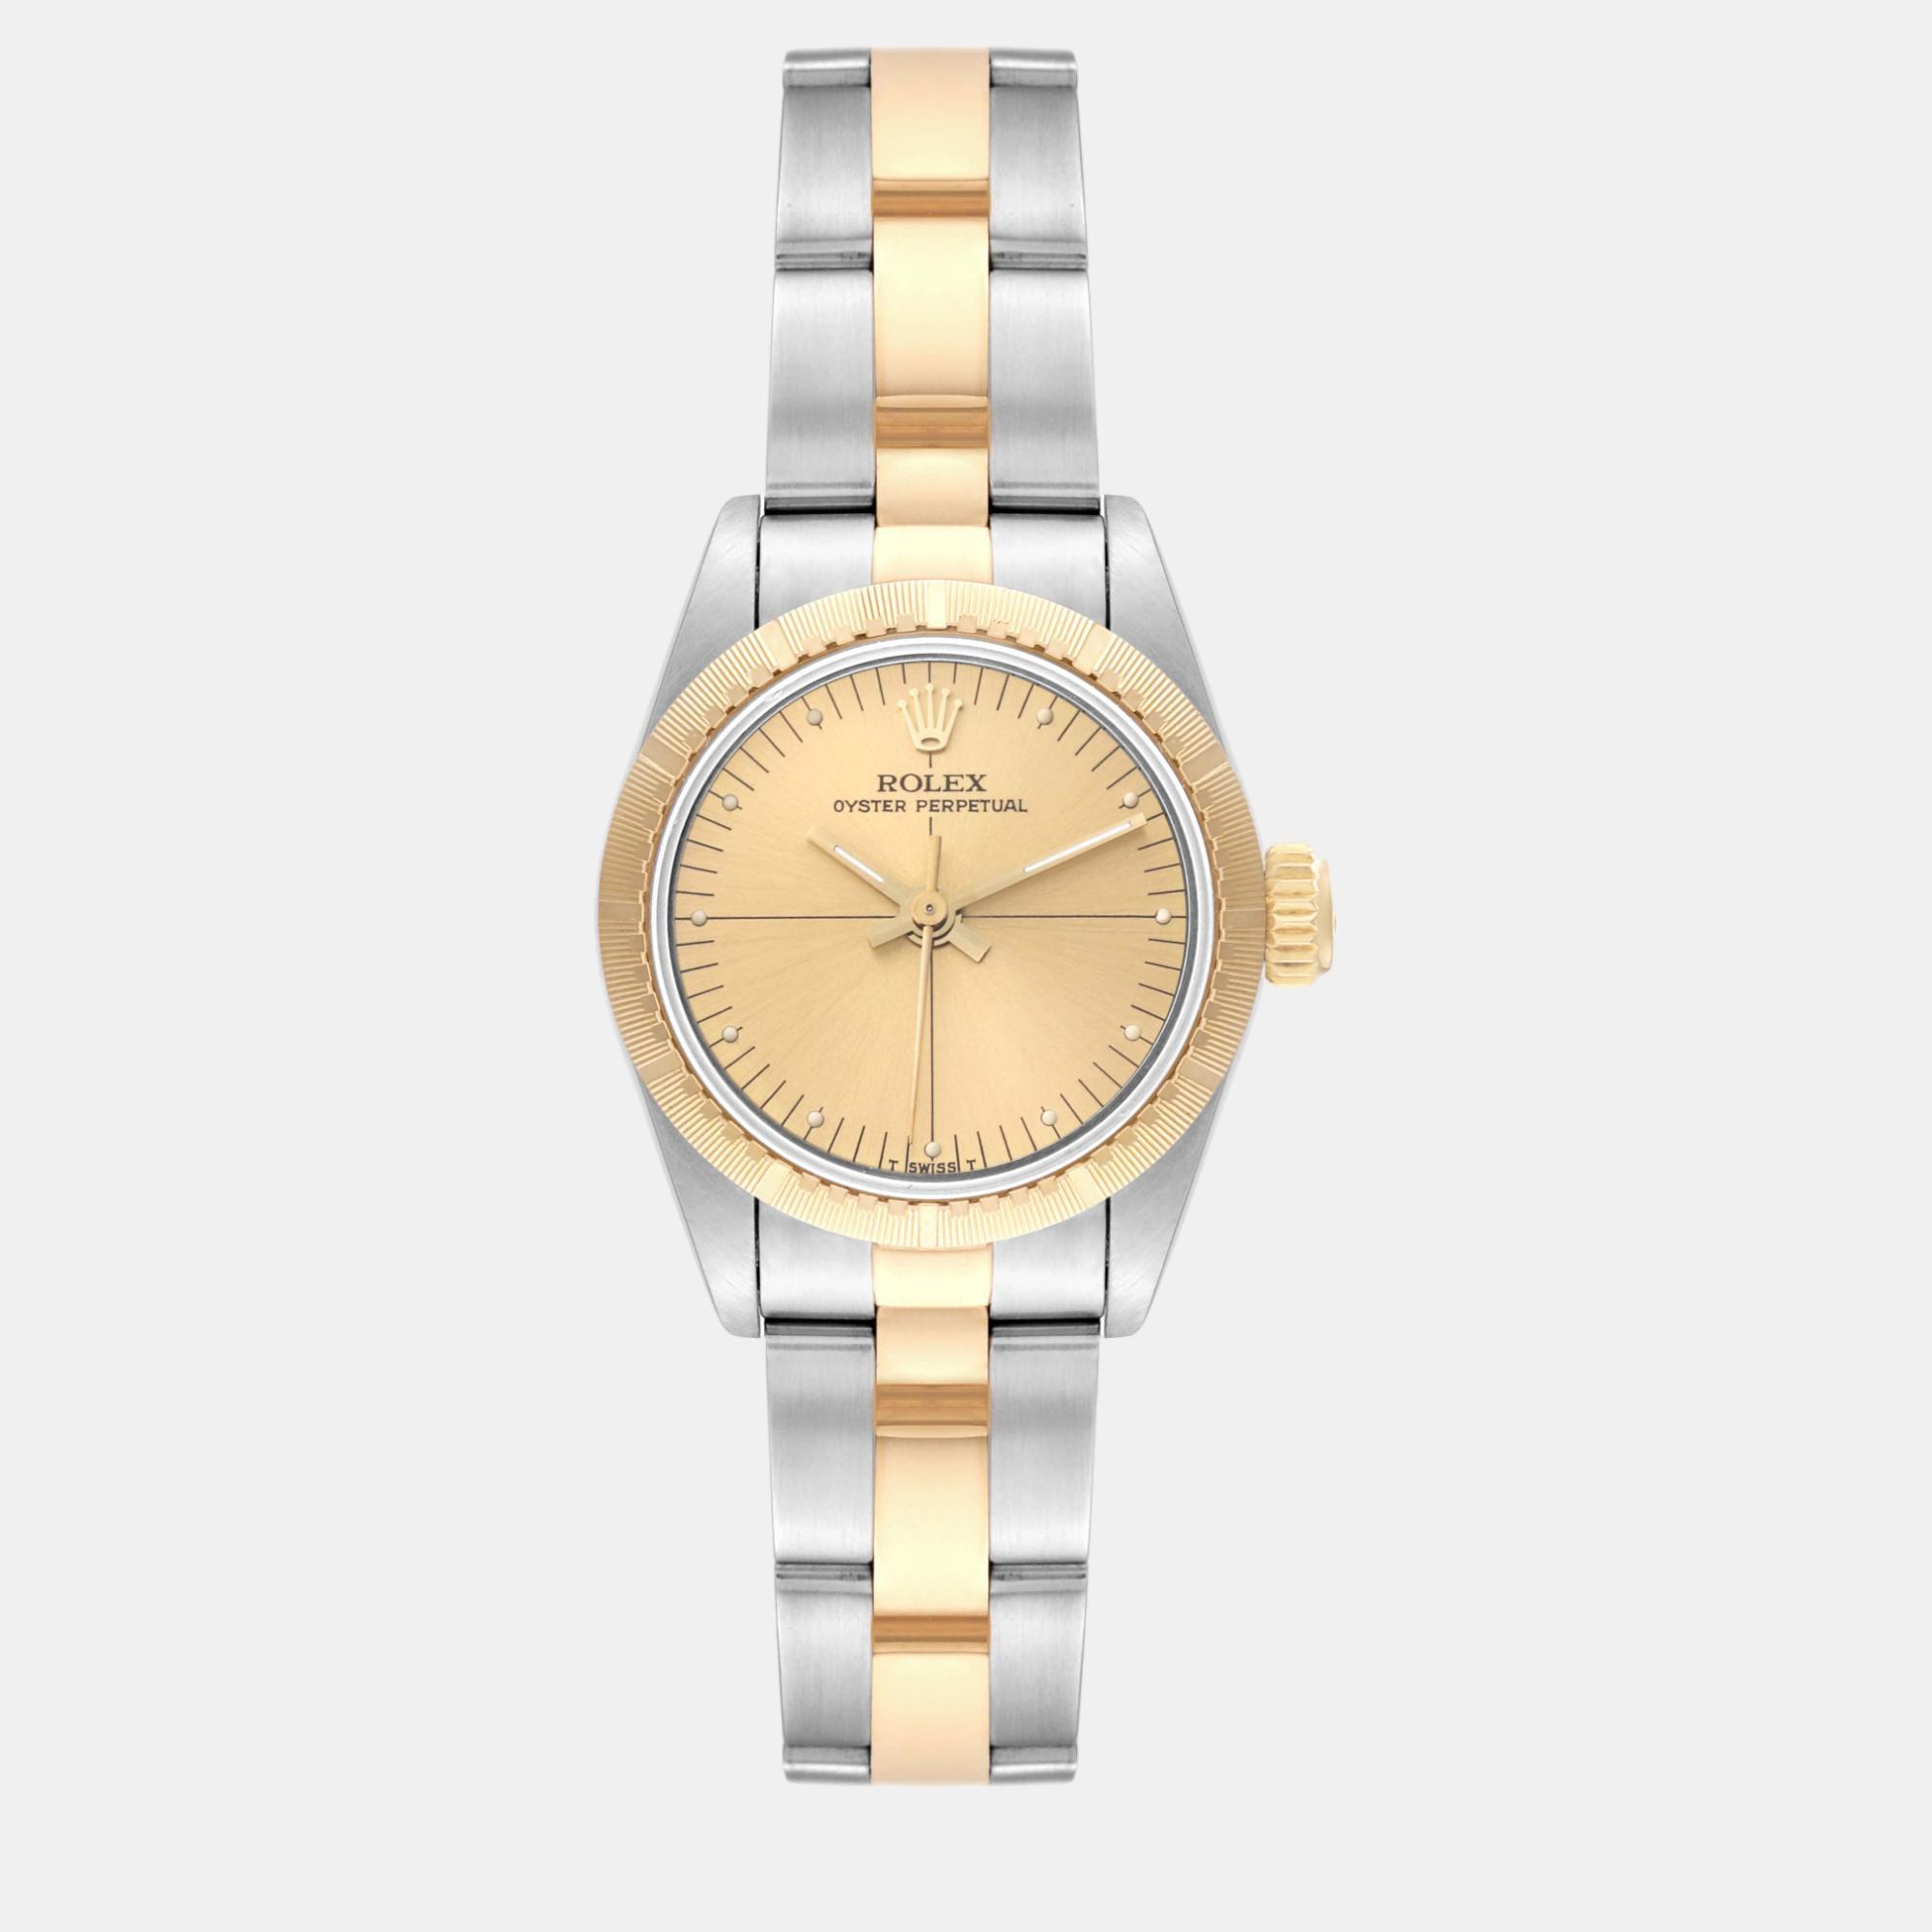 Rolex oyster perpetual steel yellow gold quadrant dial ladies watch 24.0 mm